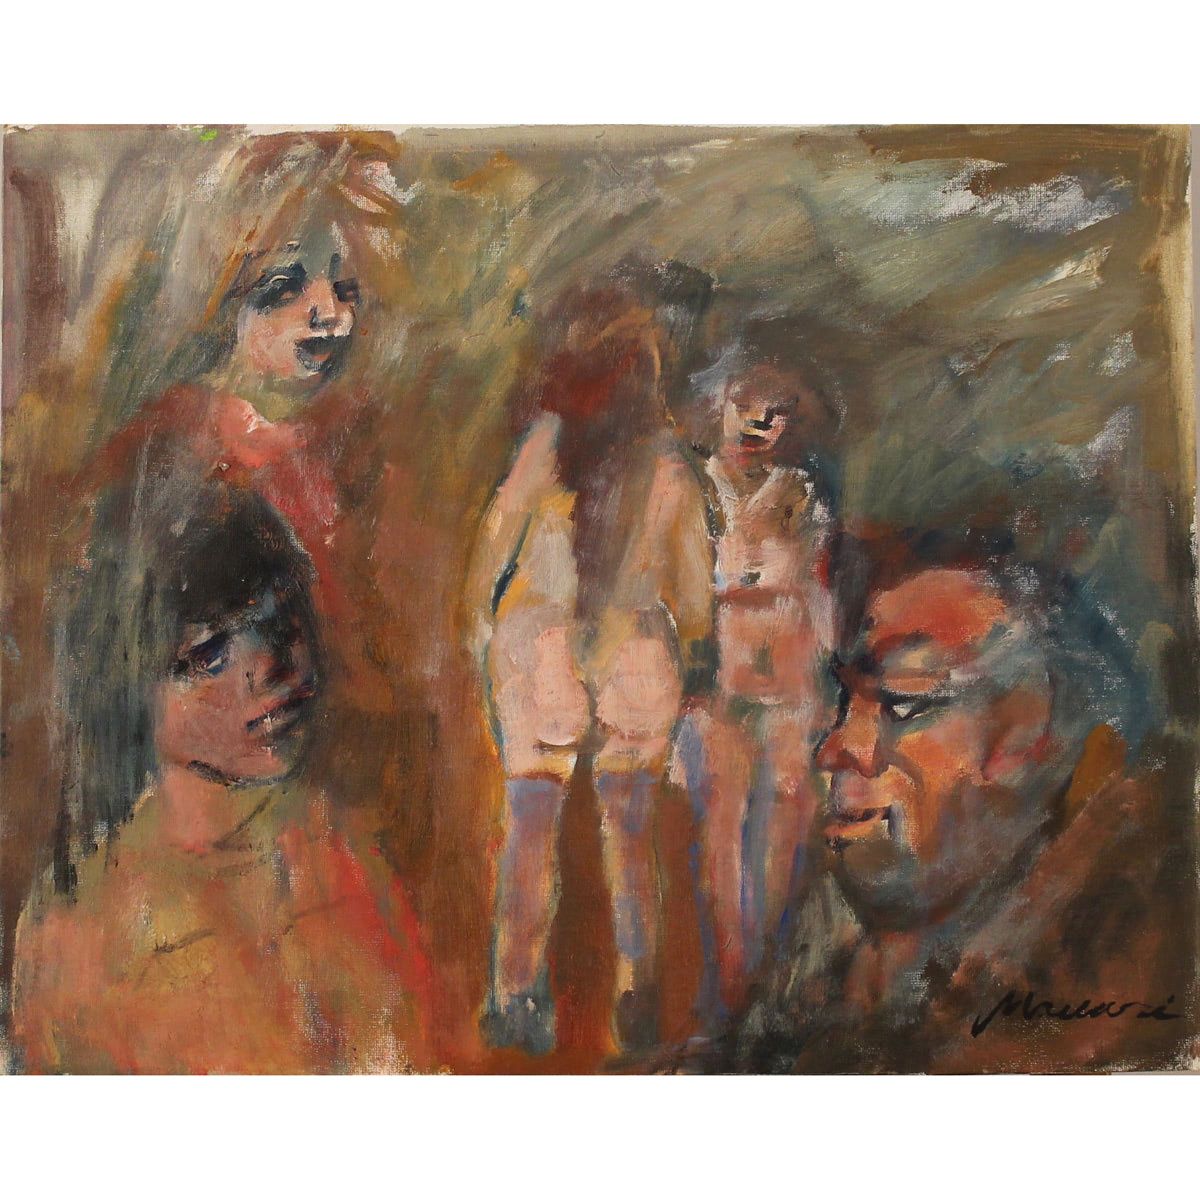 FIGURE E NUDI - FIGURES AND NUDES Oil painting on cardboard in frame. Signed Min&hellip;